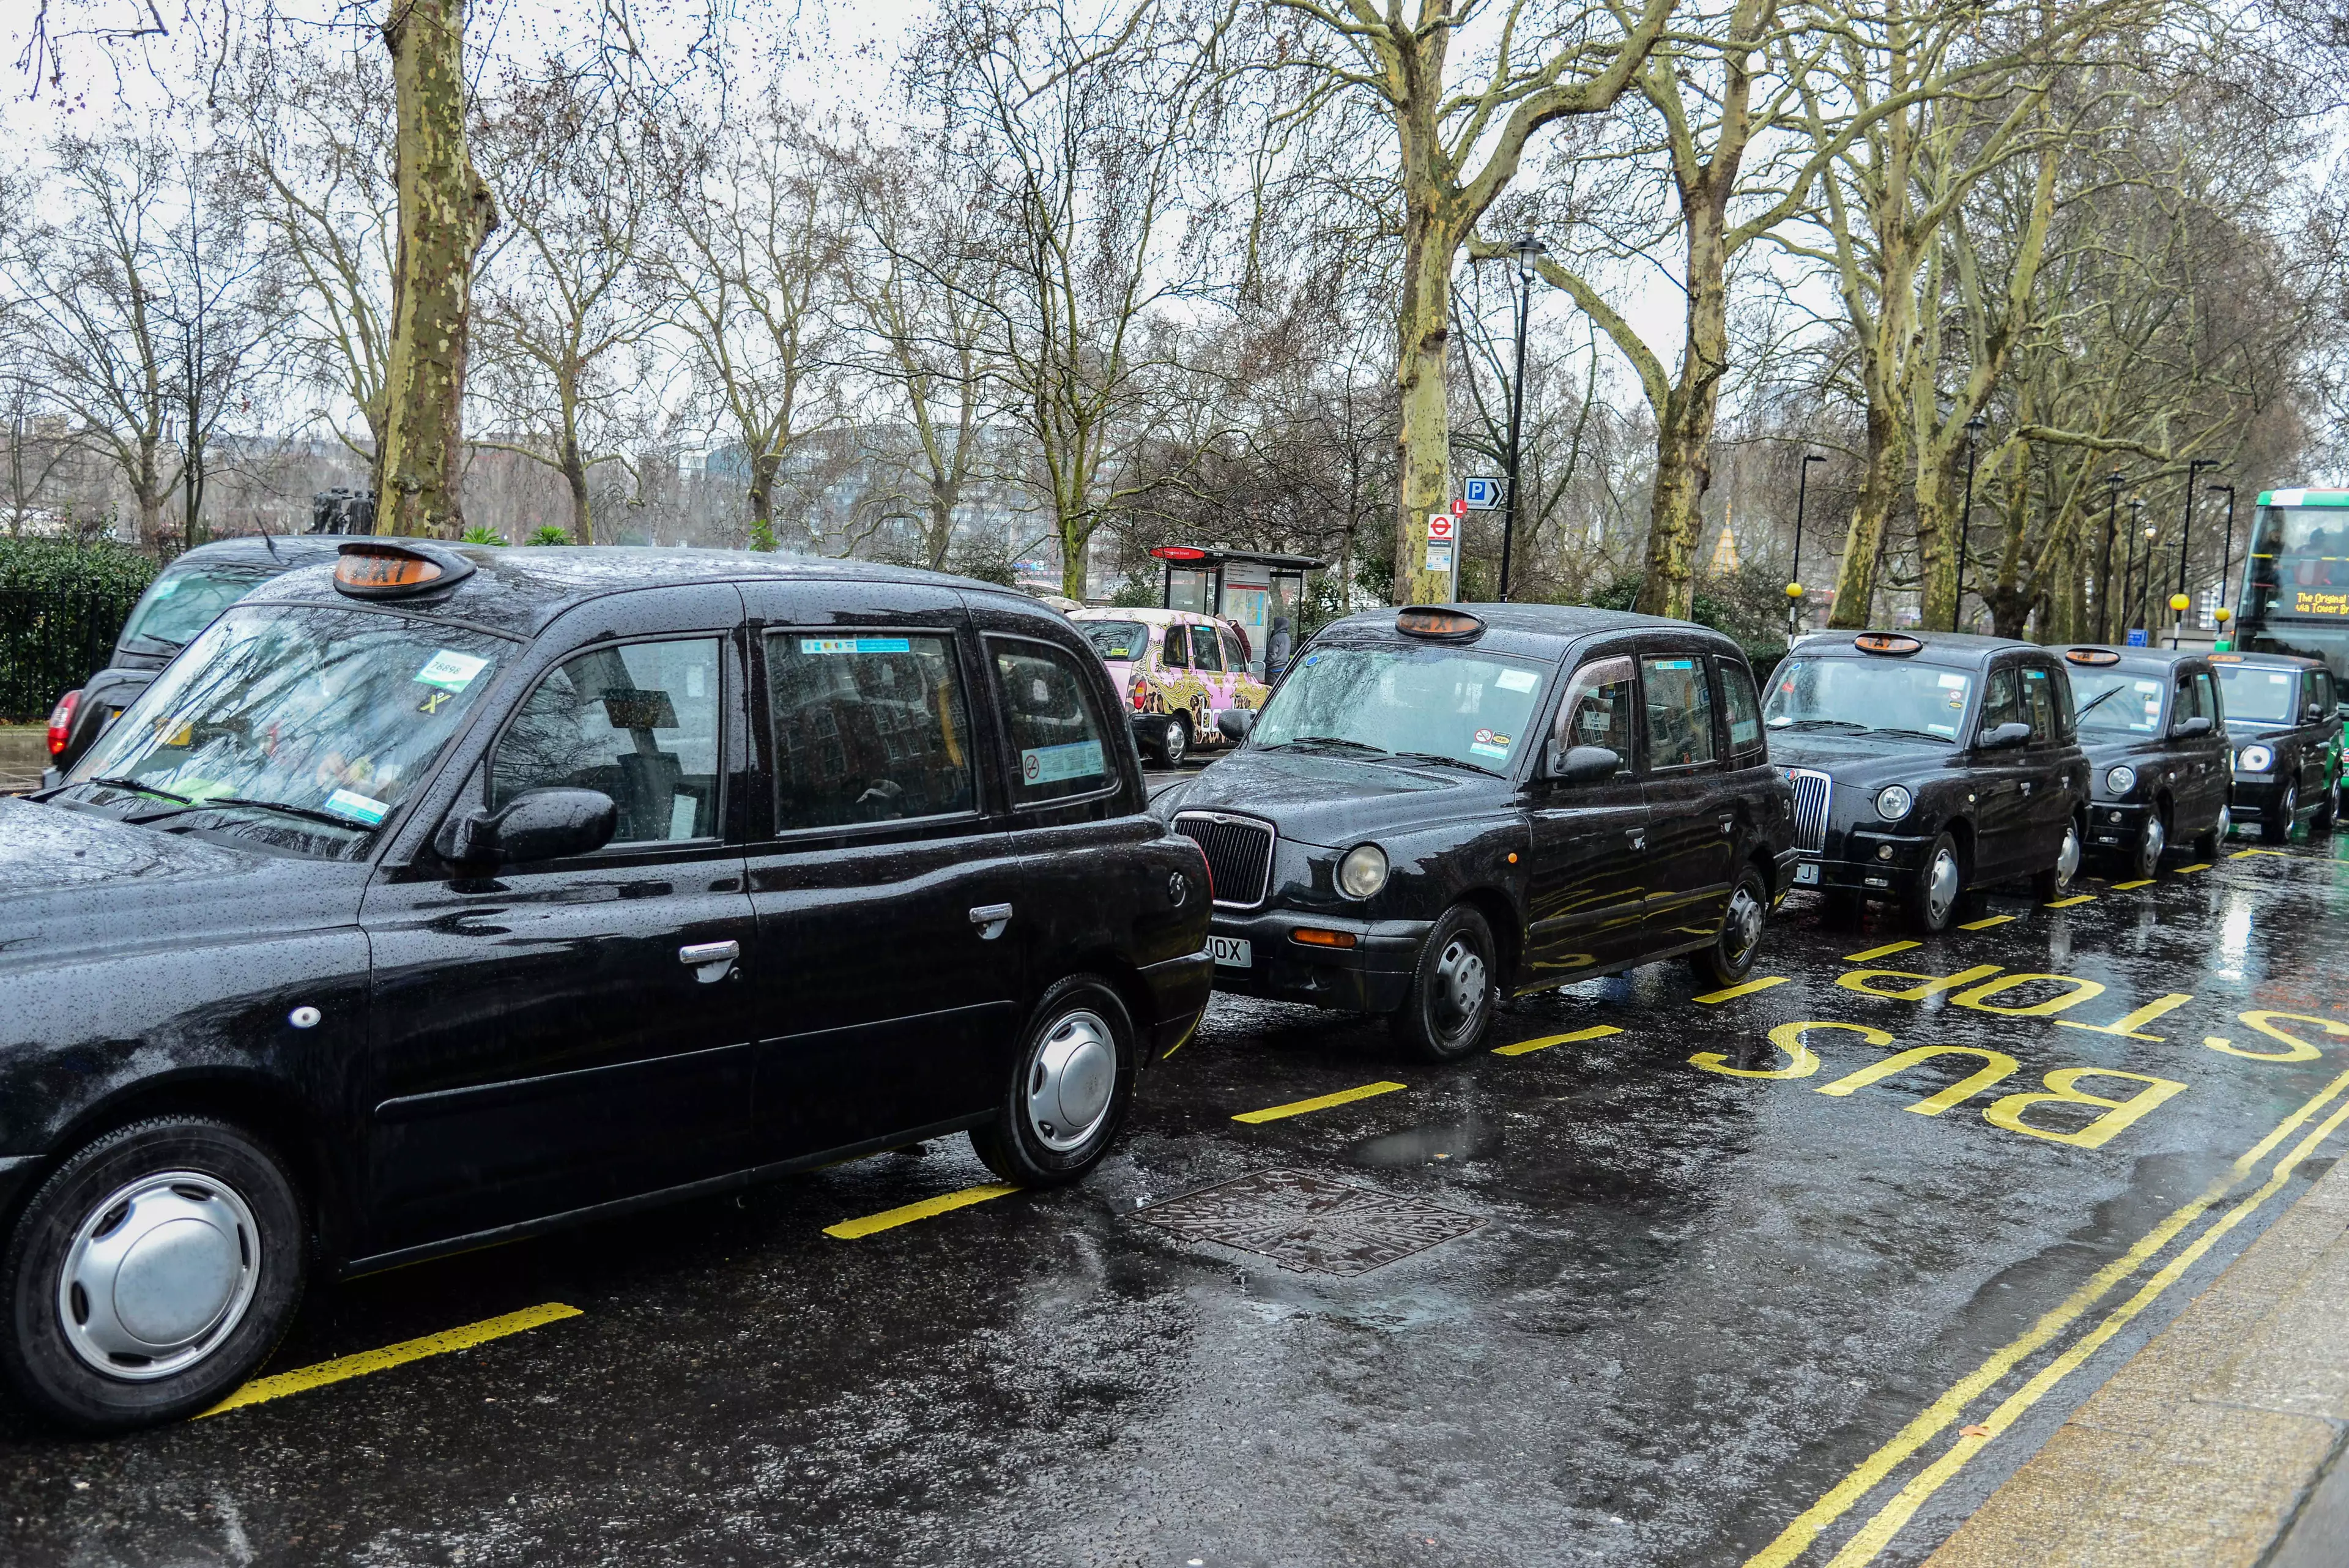 Taxi drivers have struggled to make ends meet because of the lockdown restrictions.